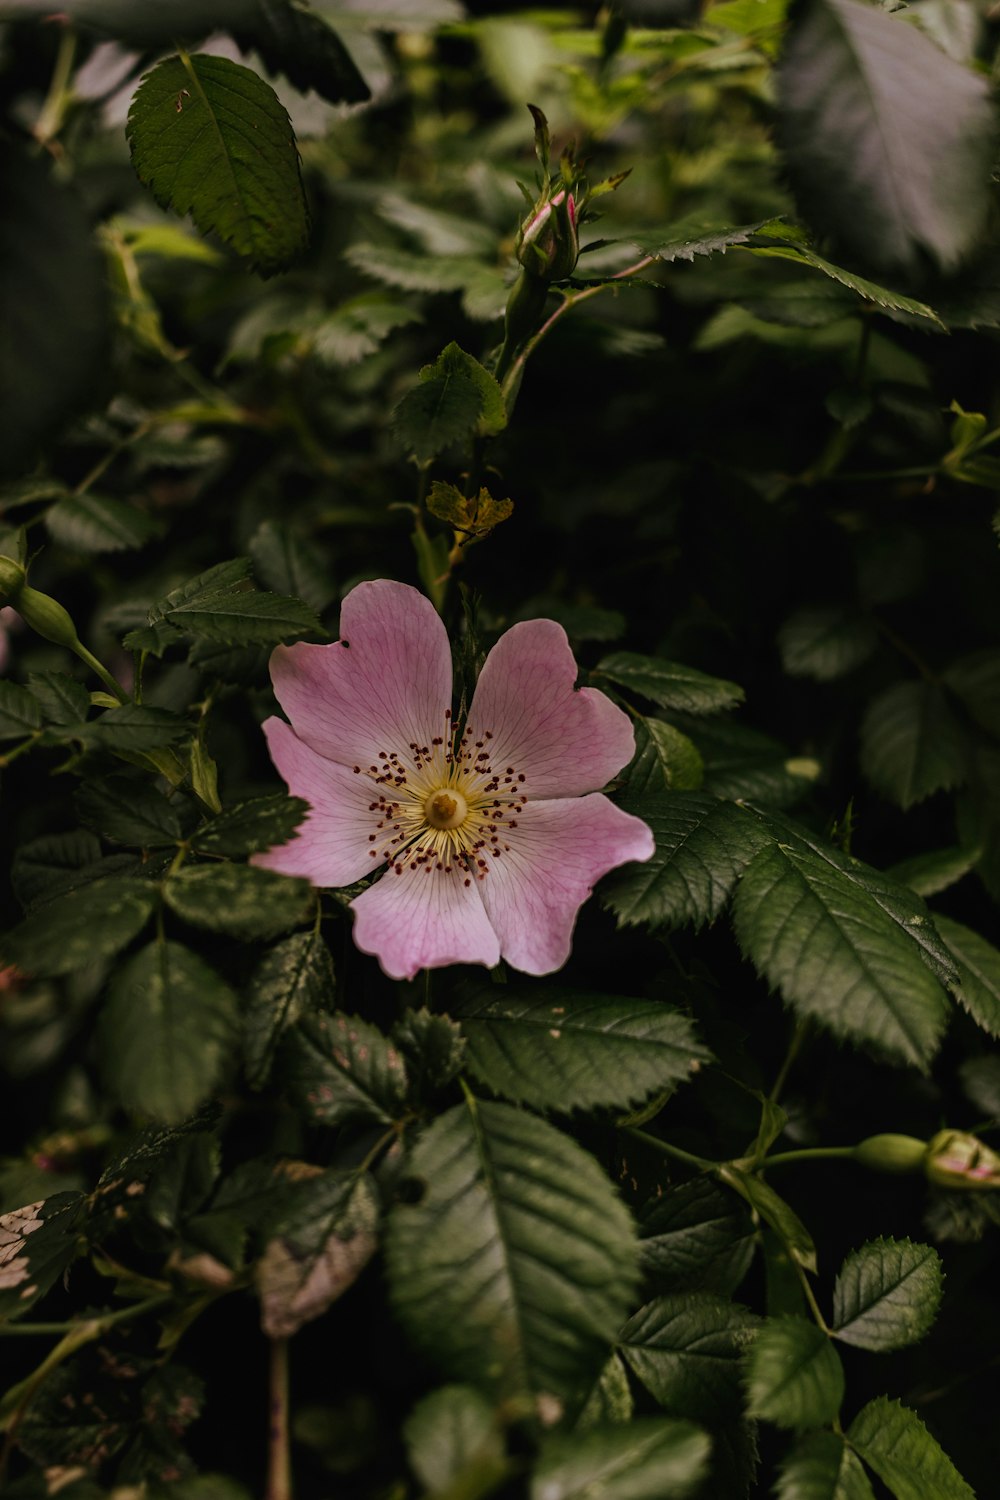 a pink flower with green leaves around it